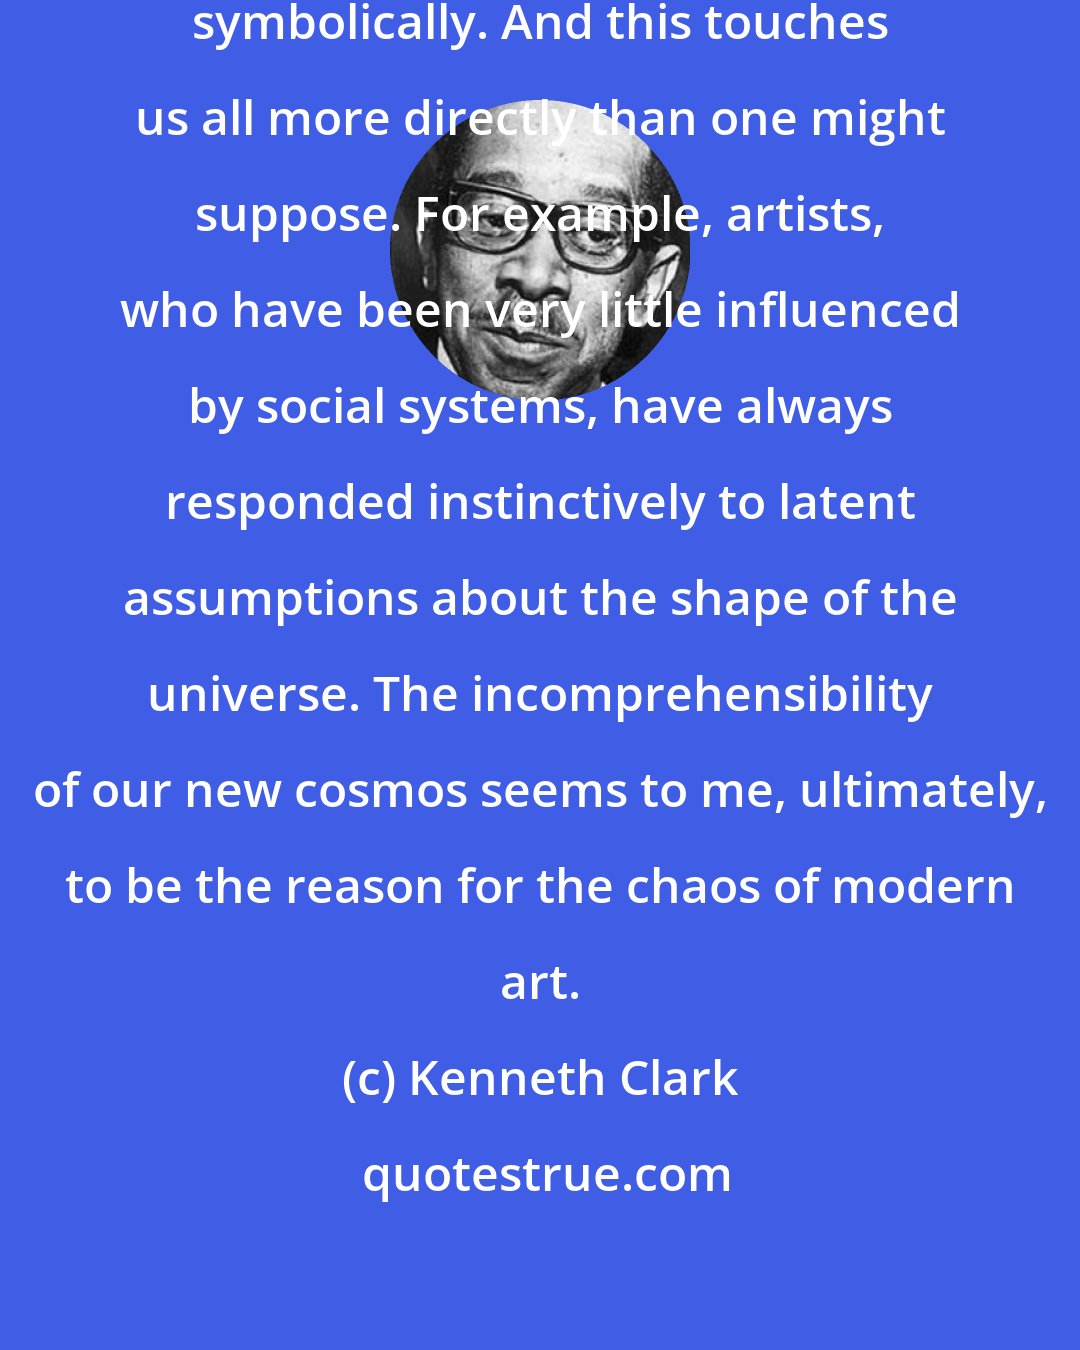 Kenneth Clark: Our universe cannot even be stated symbolically. And this touches us all more directly than one might suppose. For example, artists, who have been very little influenced by social systems, have always responded instinctively to latent assumptions about the shape of the universe. The incomprehensibility of our new cosmos seems to me, ultimately, to be the reason for the chaos of modern art.